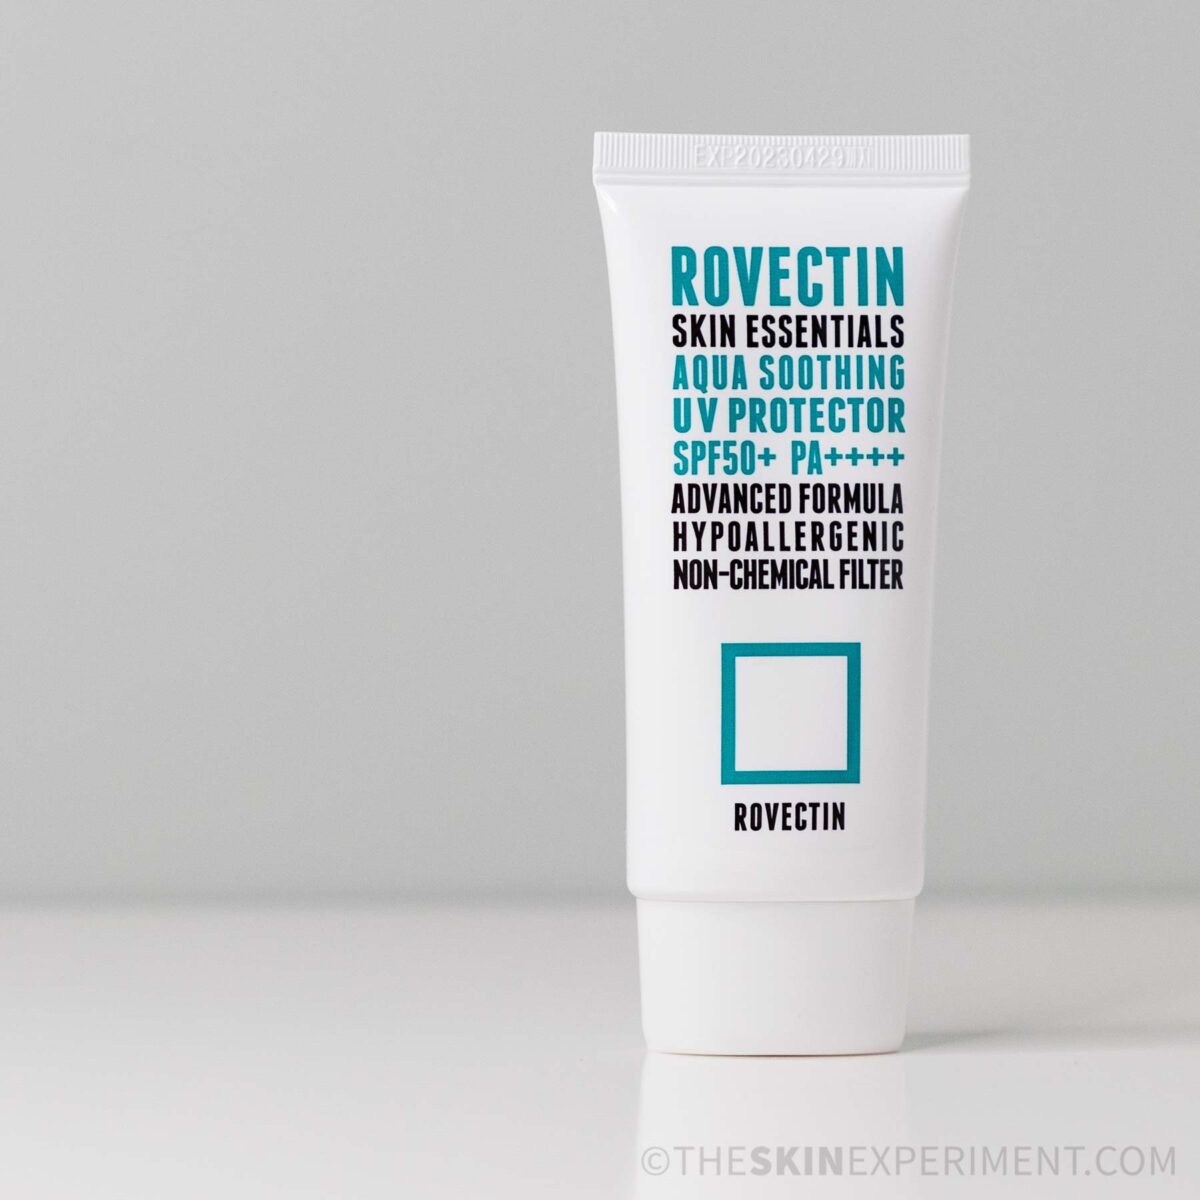 Rovectin Sunscreen Review: Rovectin Skin Essentials Aqua Soothing UV Protector